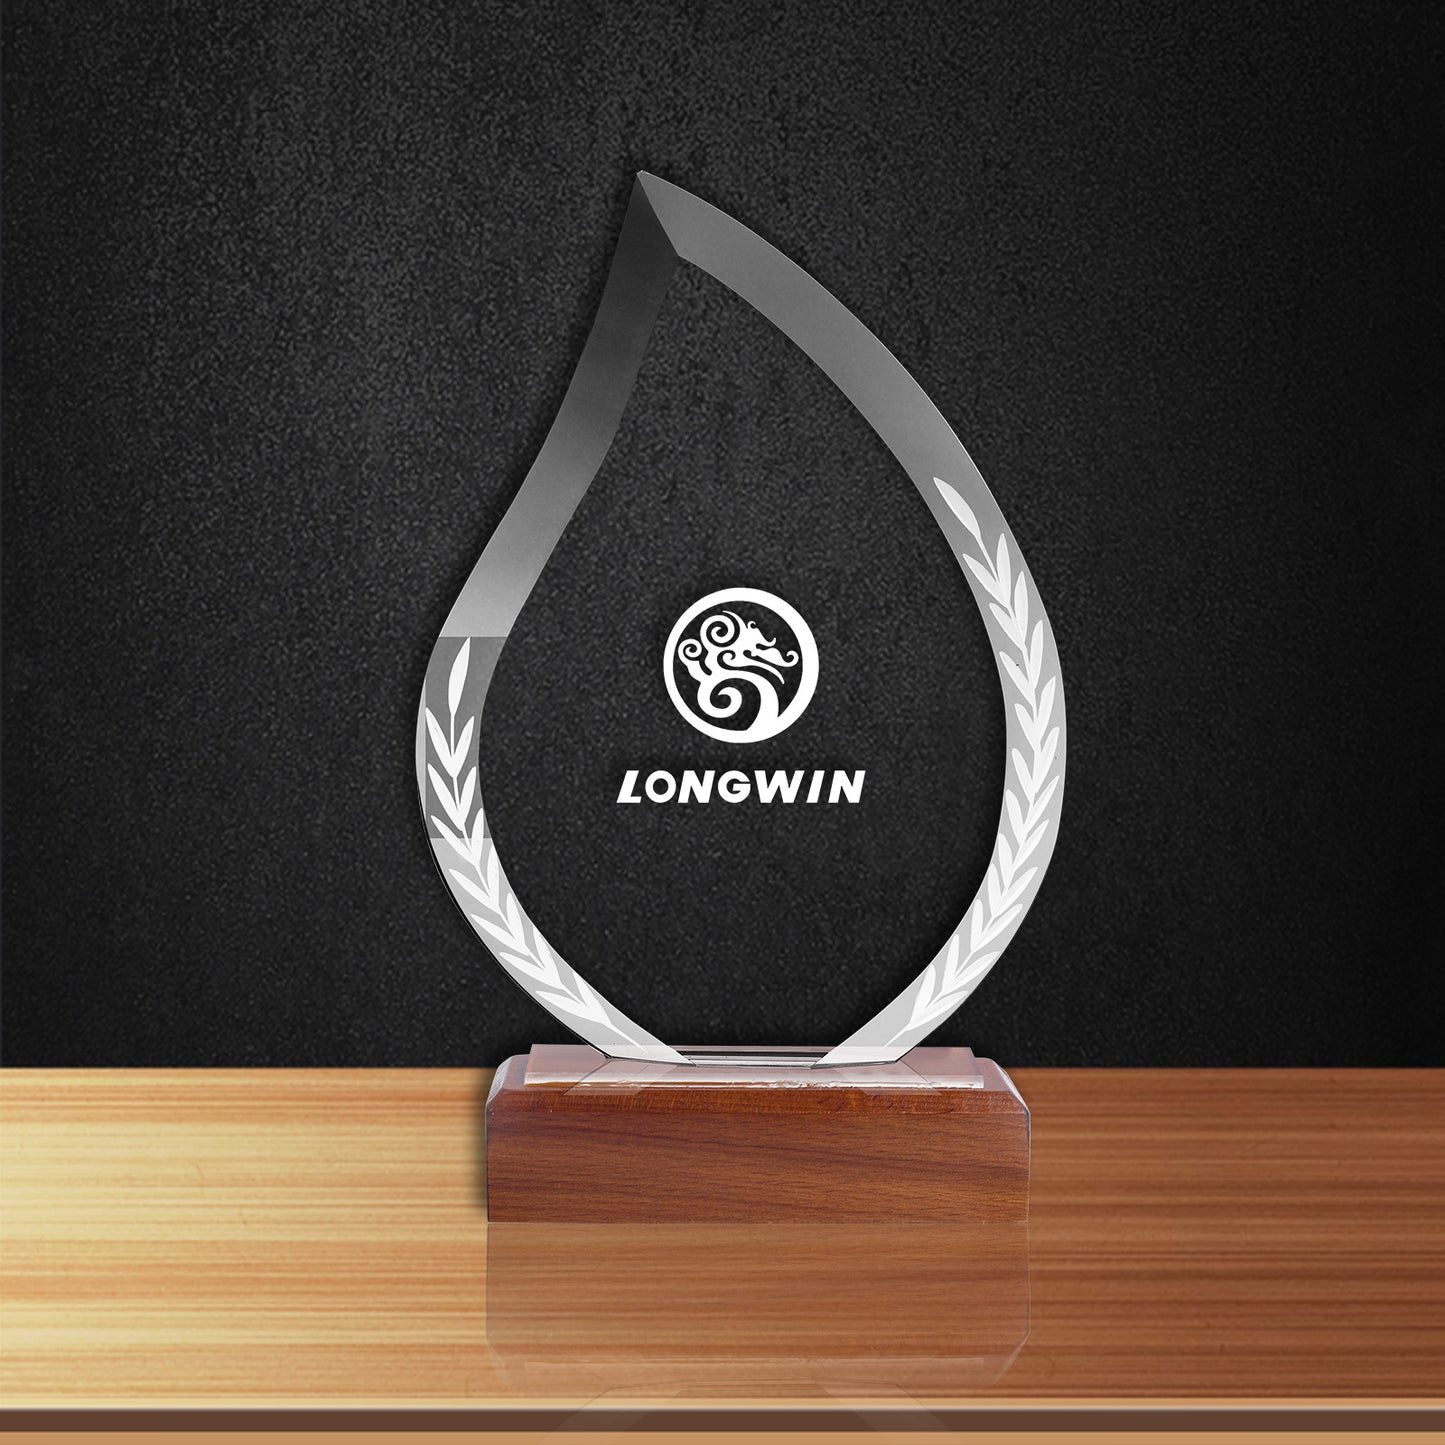 JNCT-194 Longwin Leaf-shaped Crystal Trophy with Wooden Base